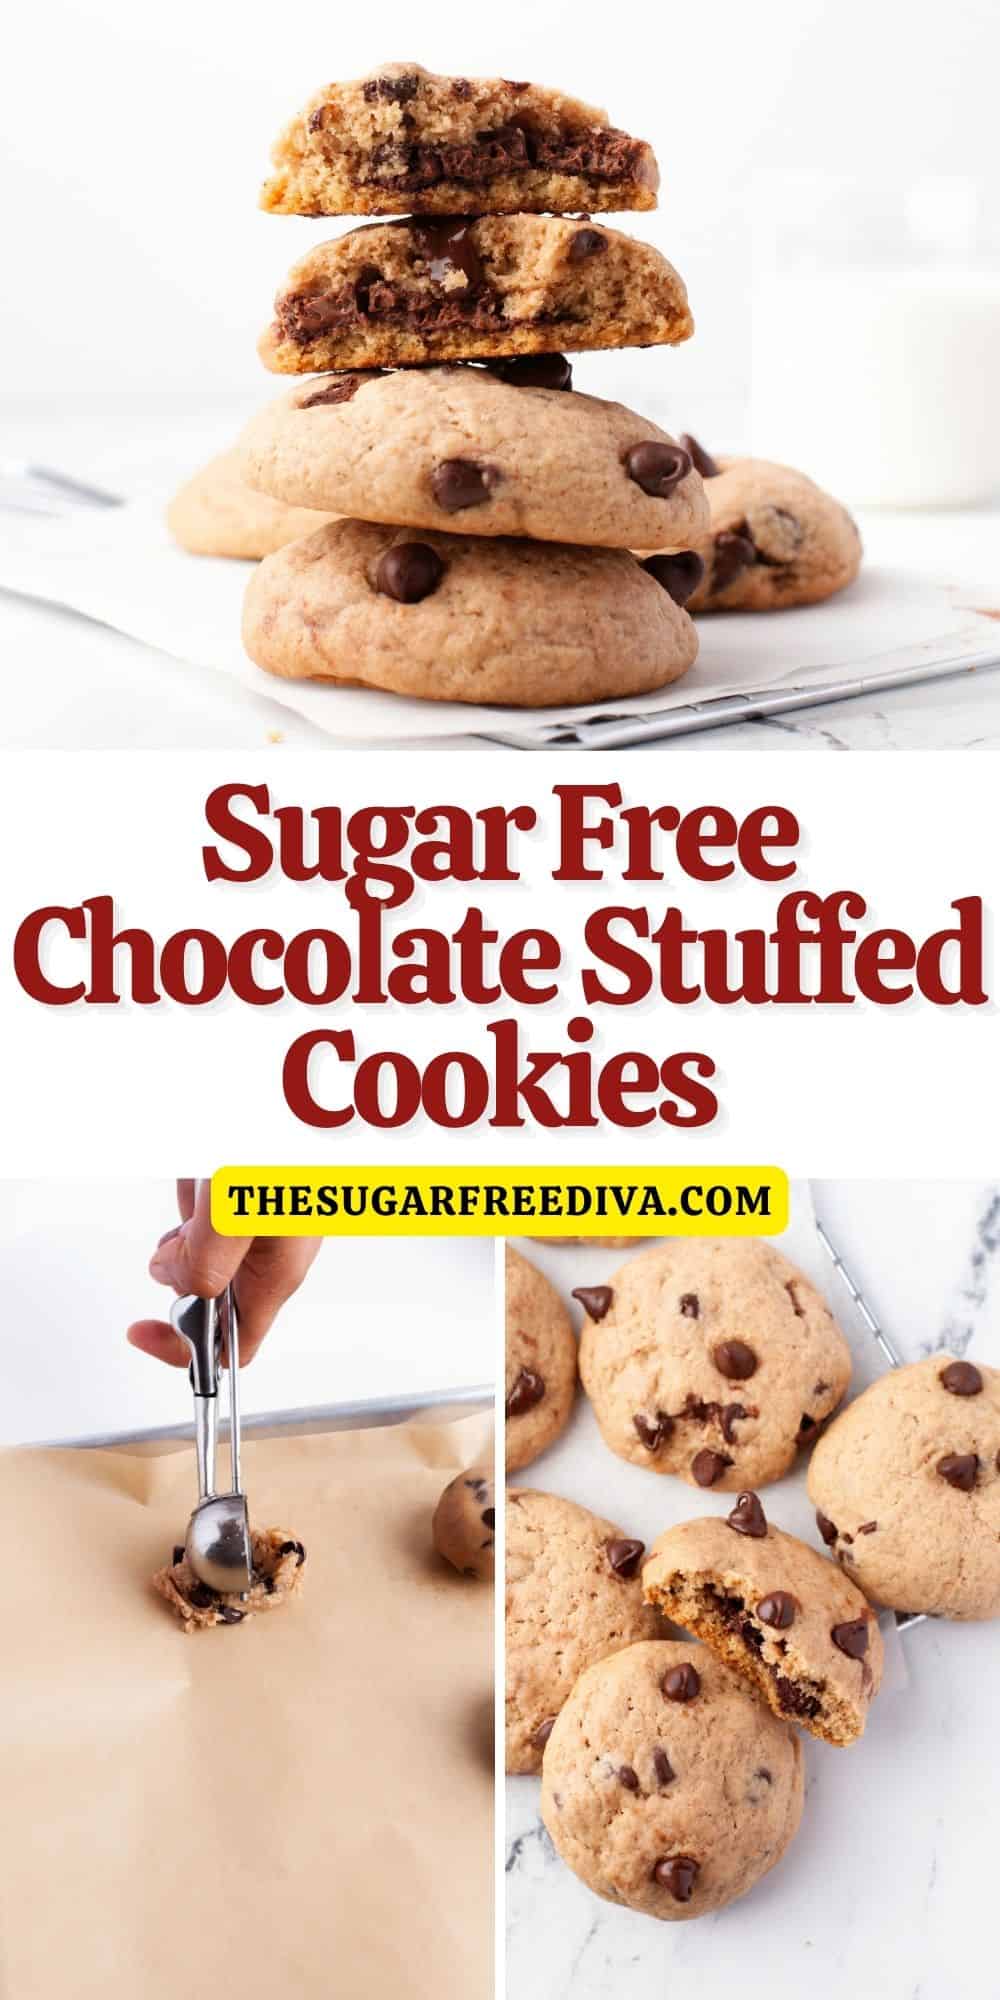 Sugar Free Chocolate Stuffed Cookies, a simple and delicious dessert recipe for chocolate chip cookies stuffed with chocolate or spread.